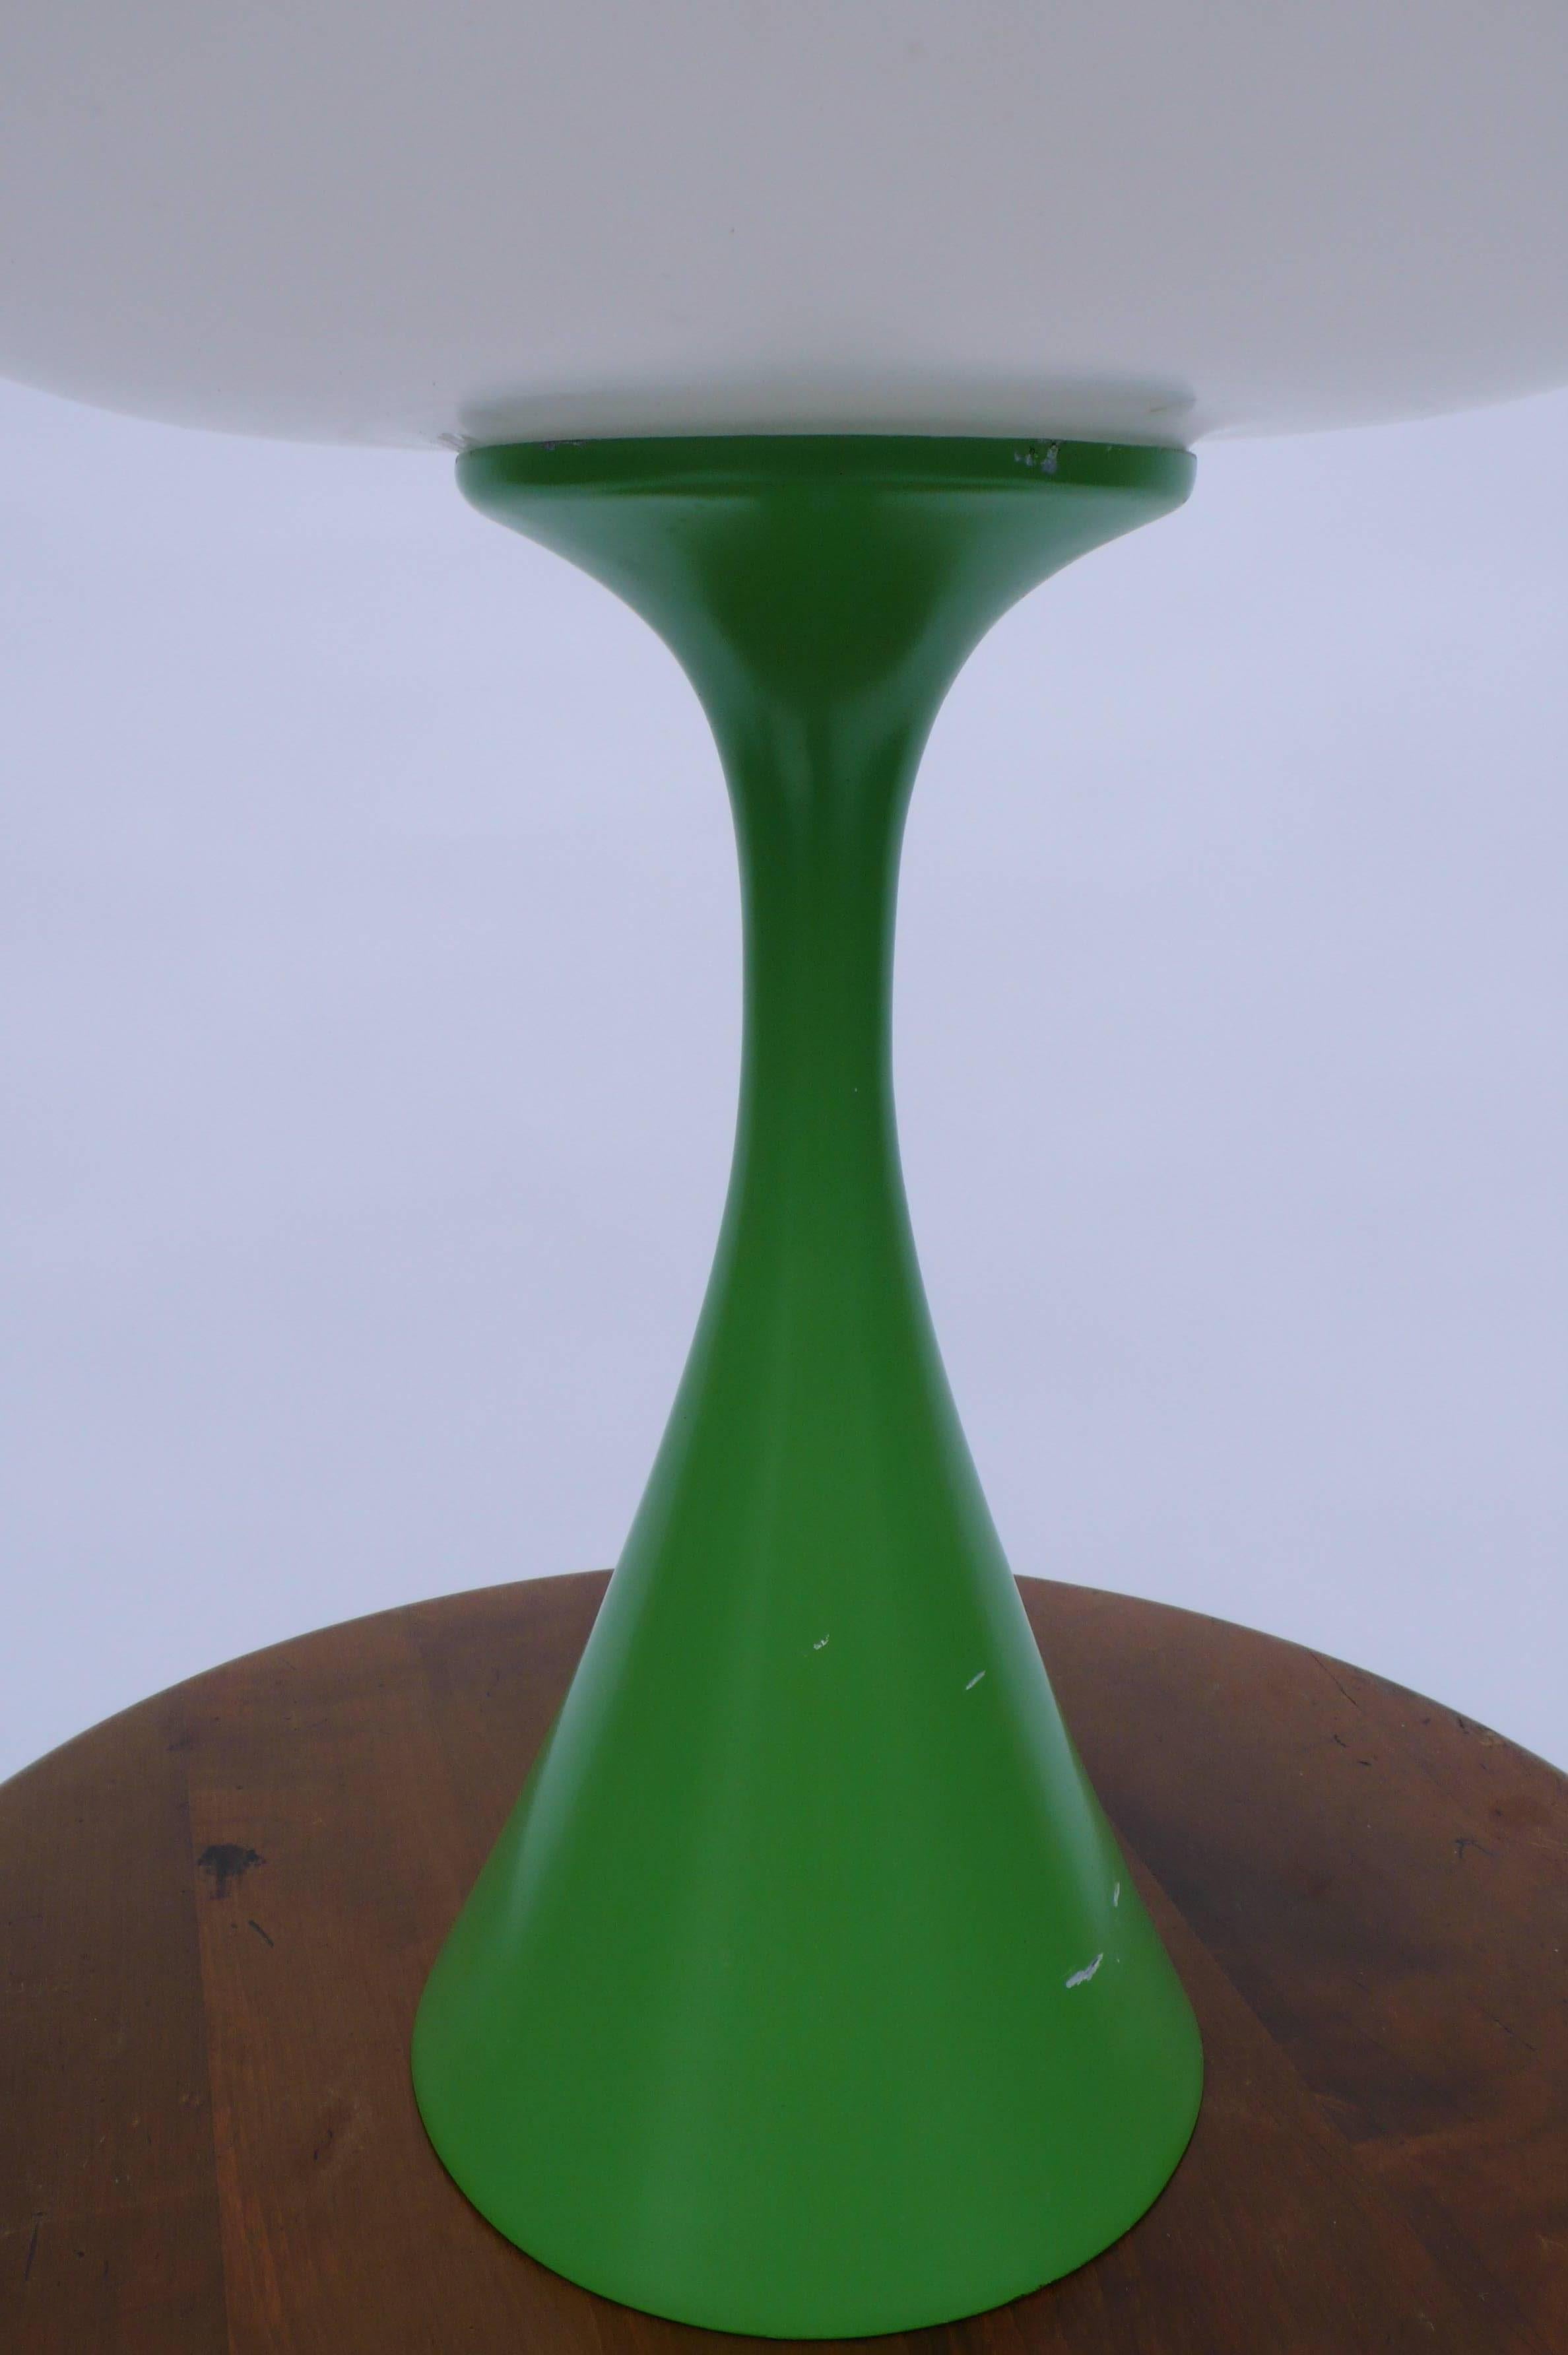 1960s table lamp by Laurel. Original green enamel metal base with a glass shade.